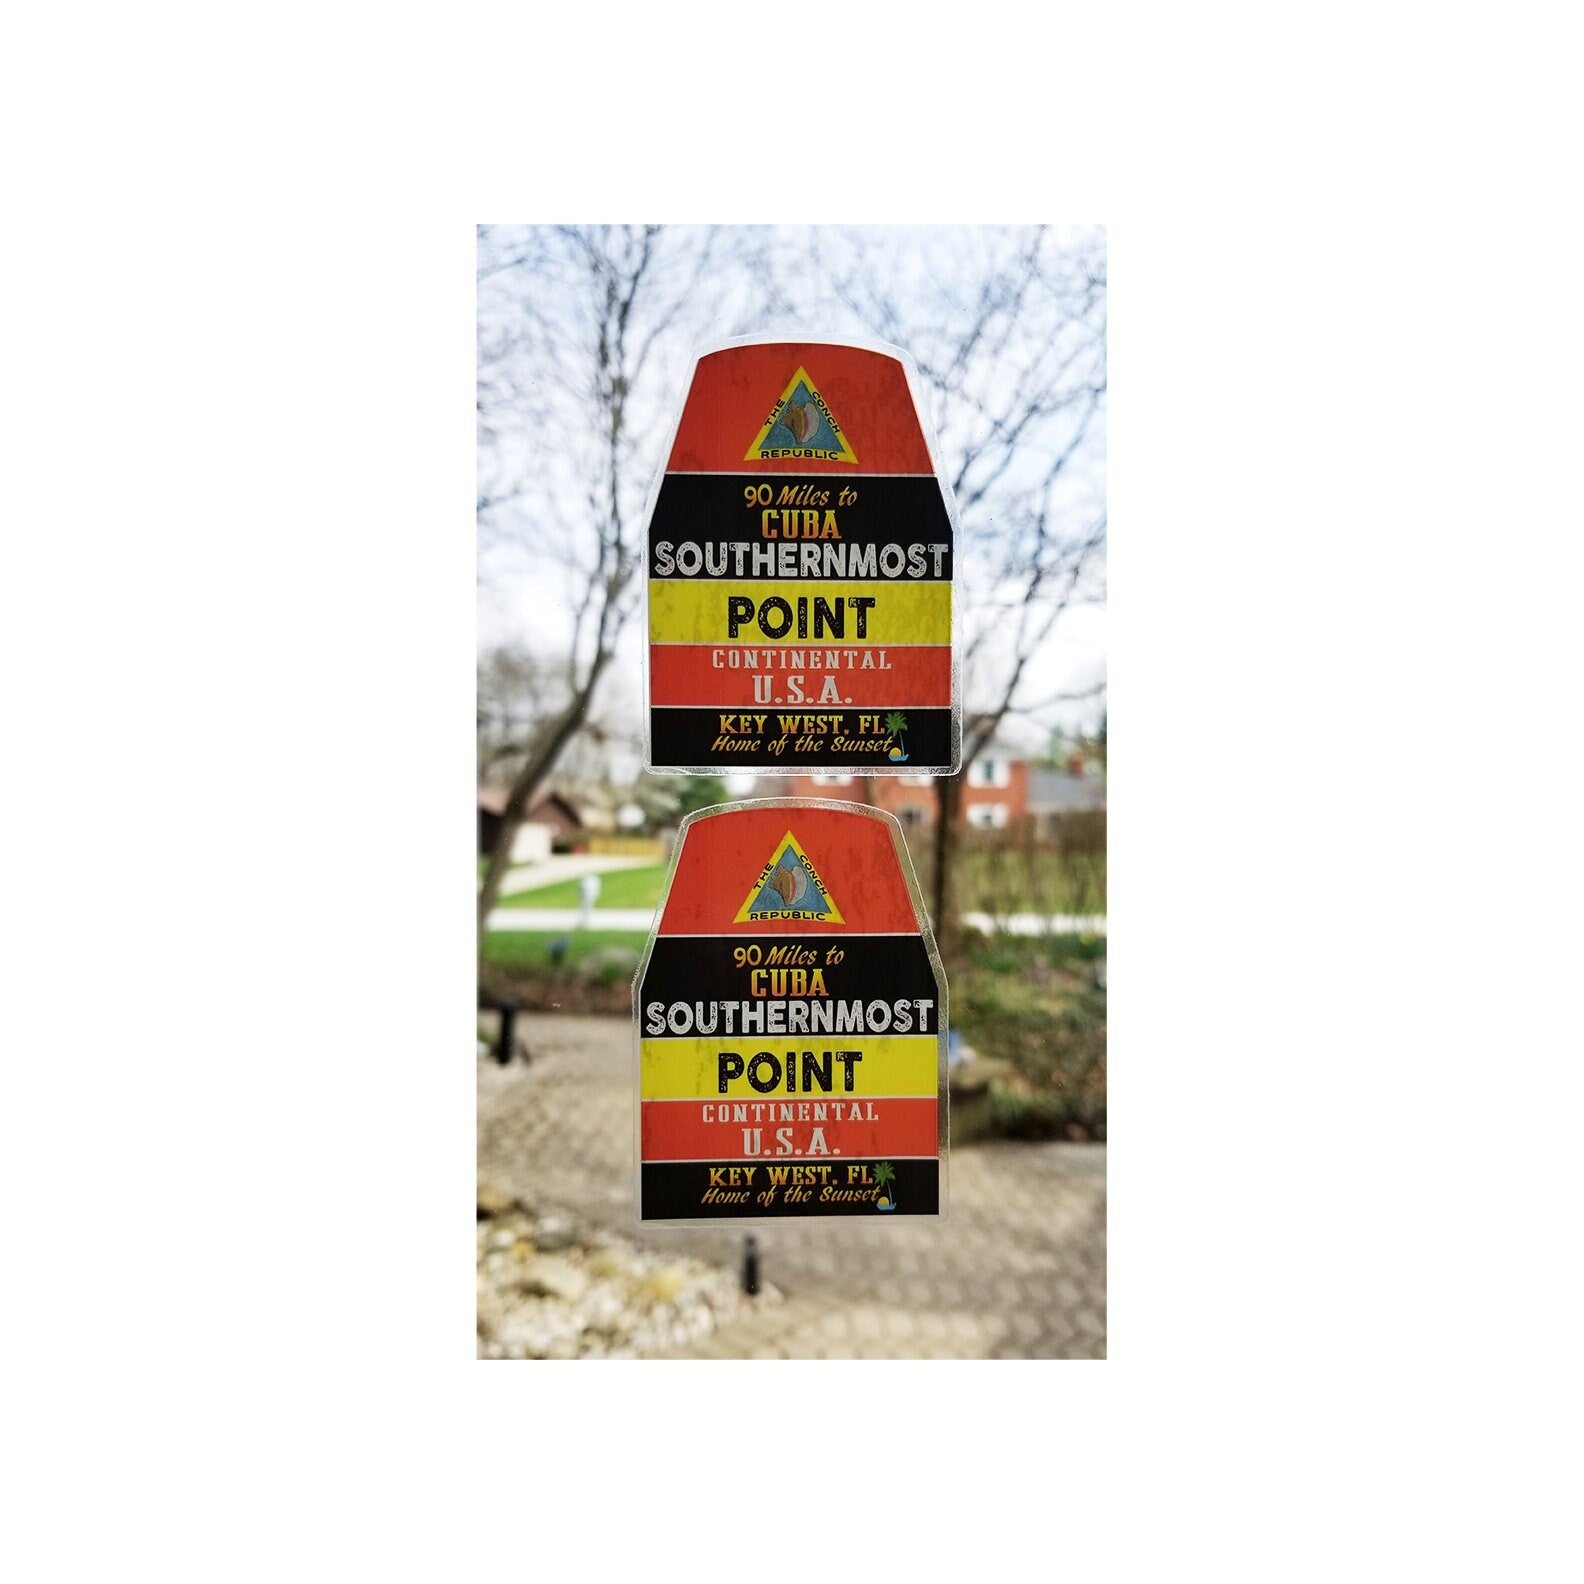 2 Key West Florida Vinyl Stickers Southernmost Point Marker Decals 3" X 2.25" Decal Sticker